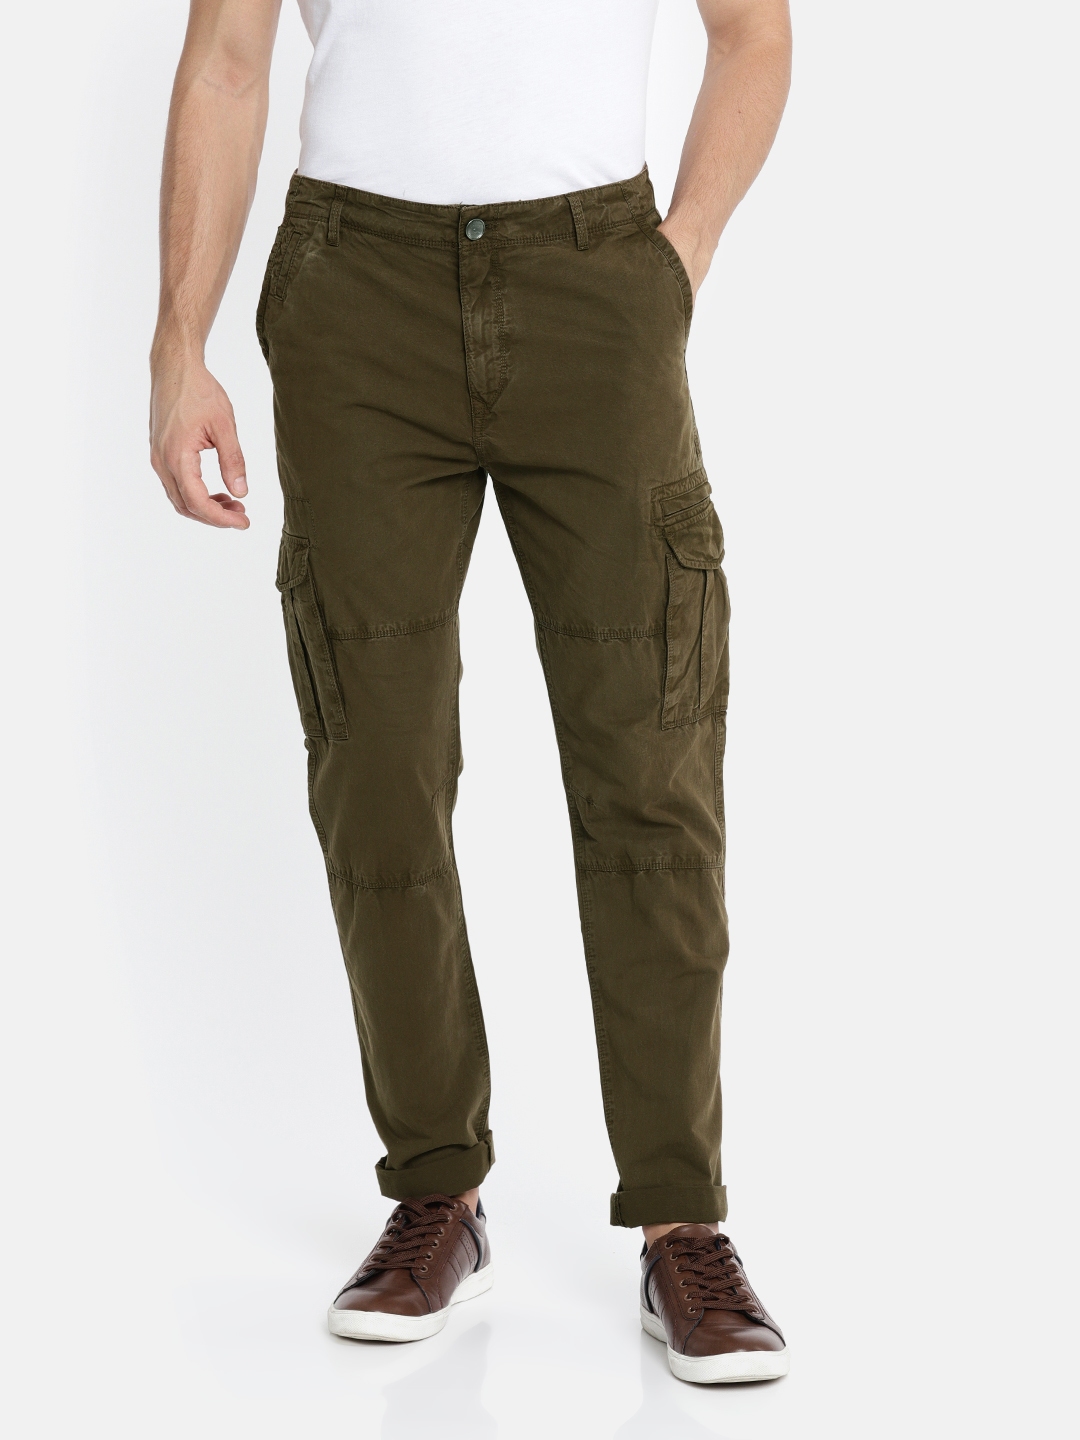 Buy Blue Trousers  Pants for Men by US Polo Assn Online  Ajiocom